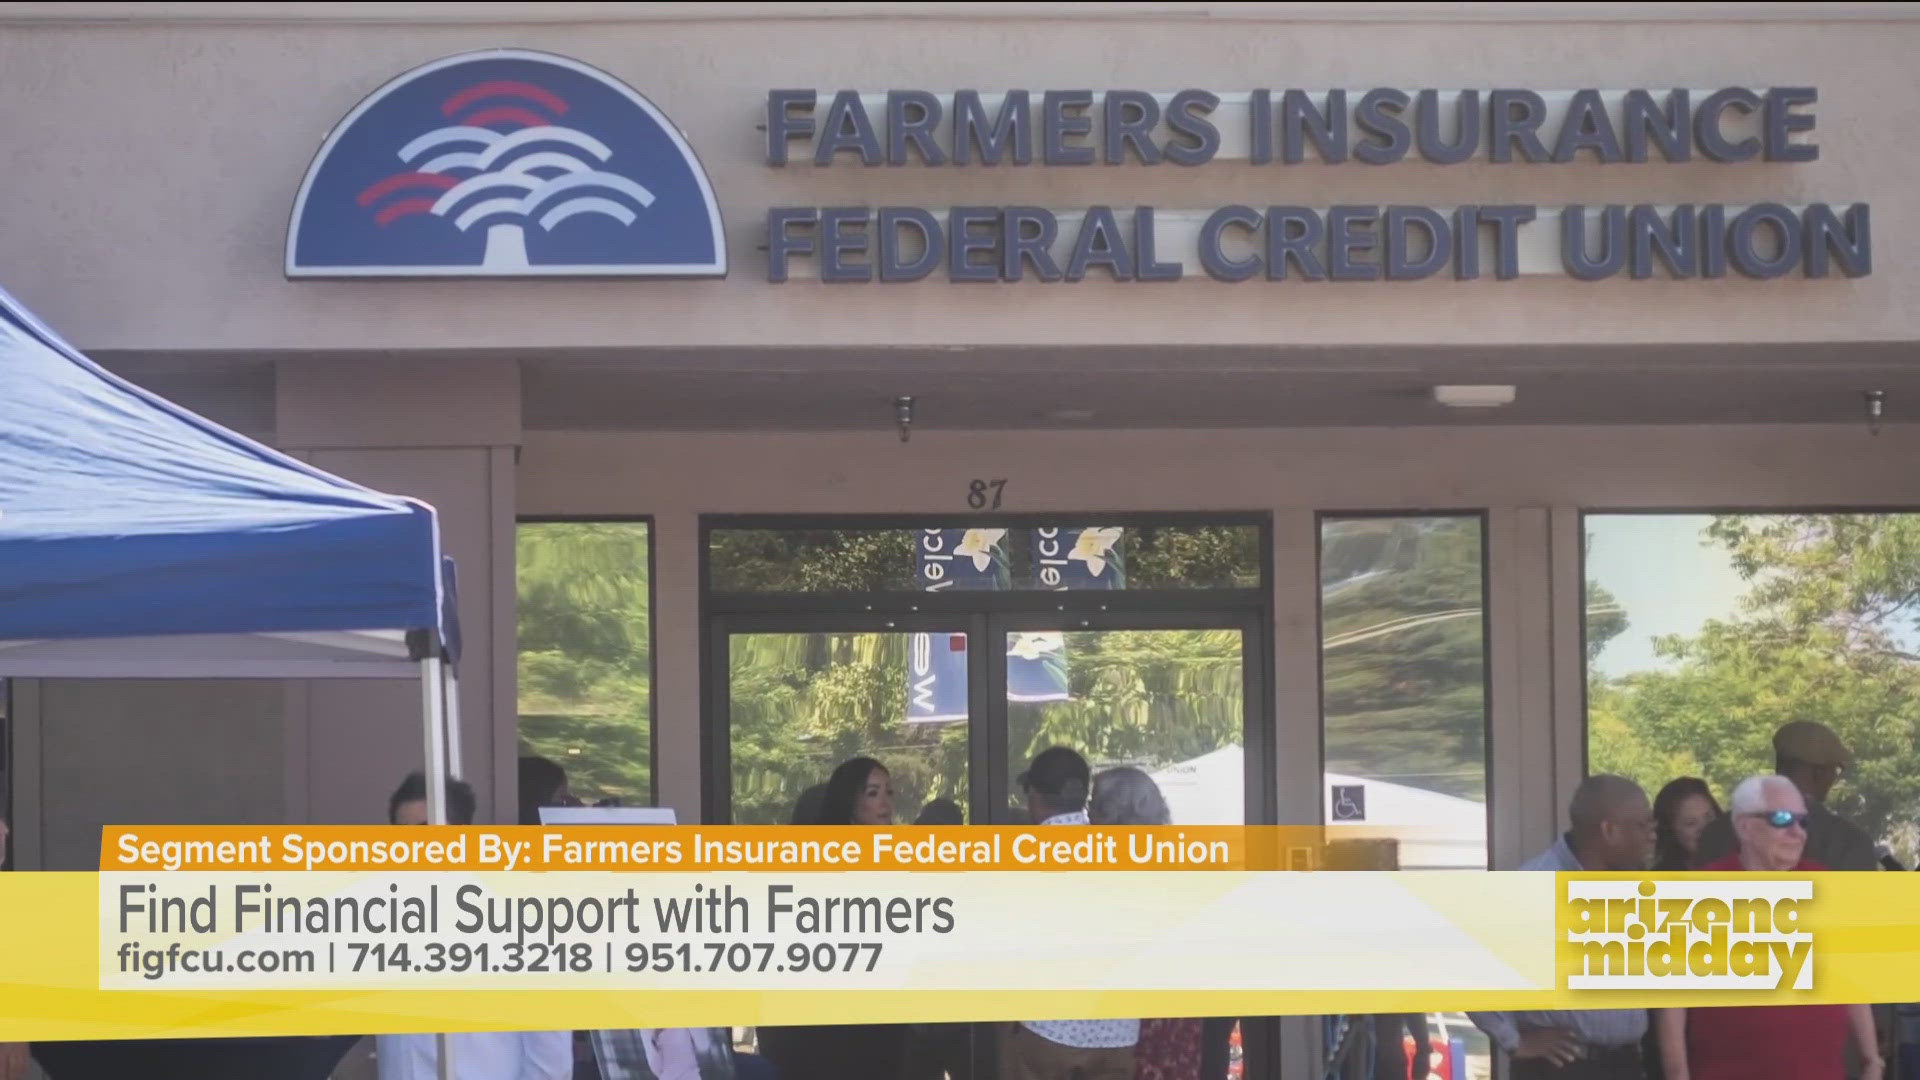 Cheri and Scott with Farmers Insurance Federal Credit Union explain services for members, how to join and a special offer.